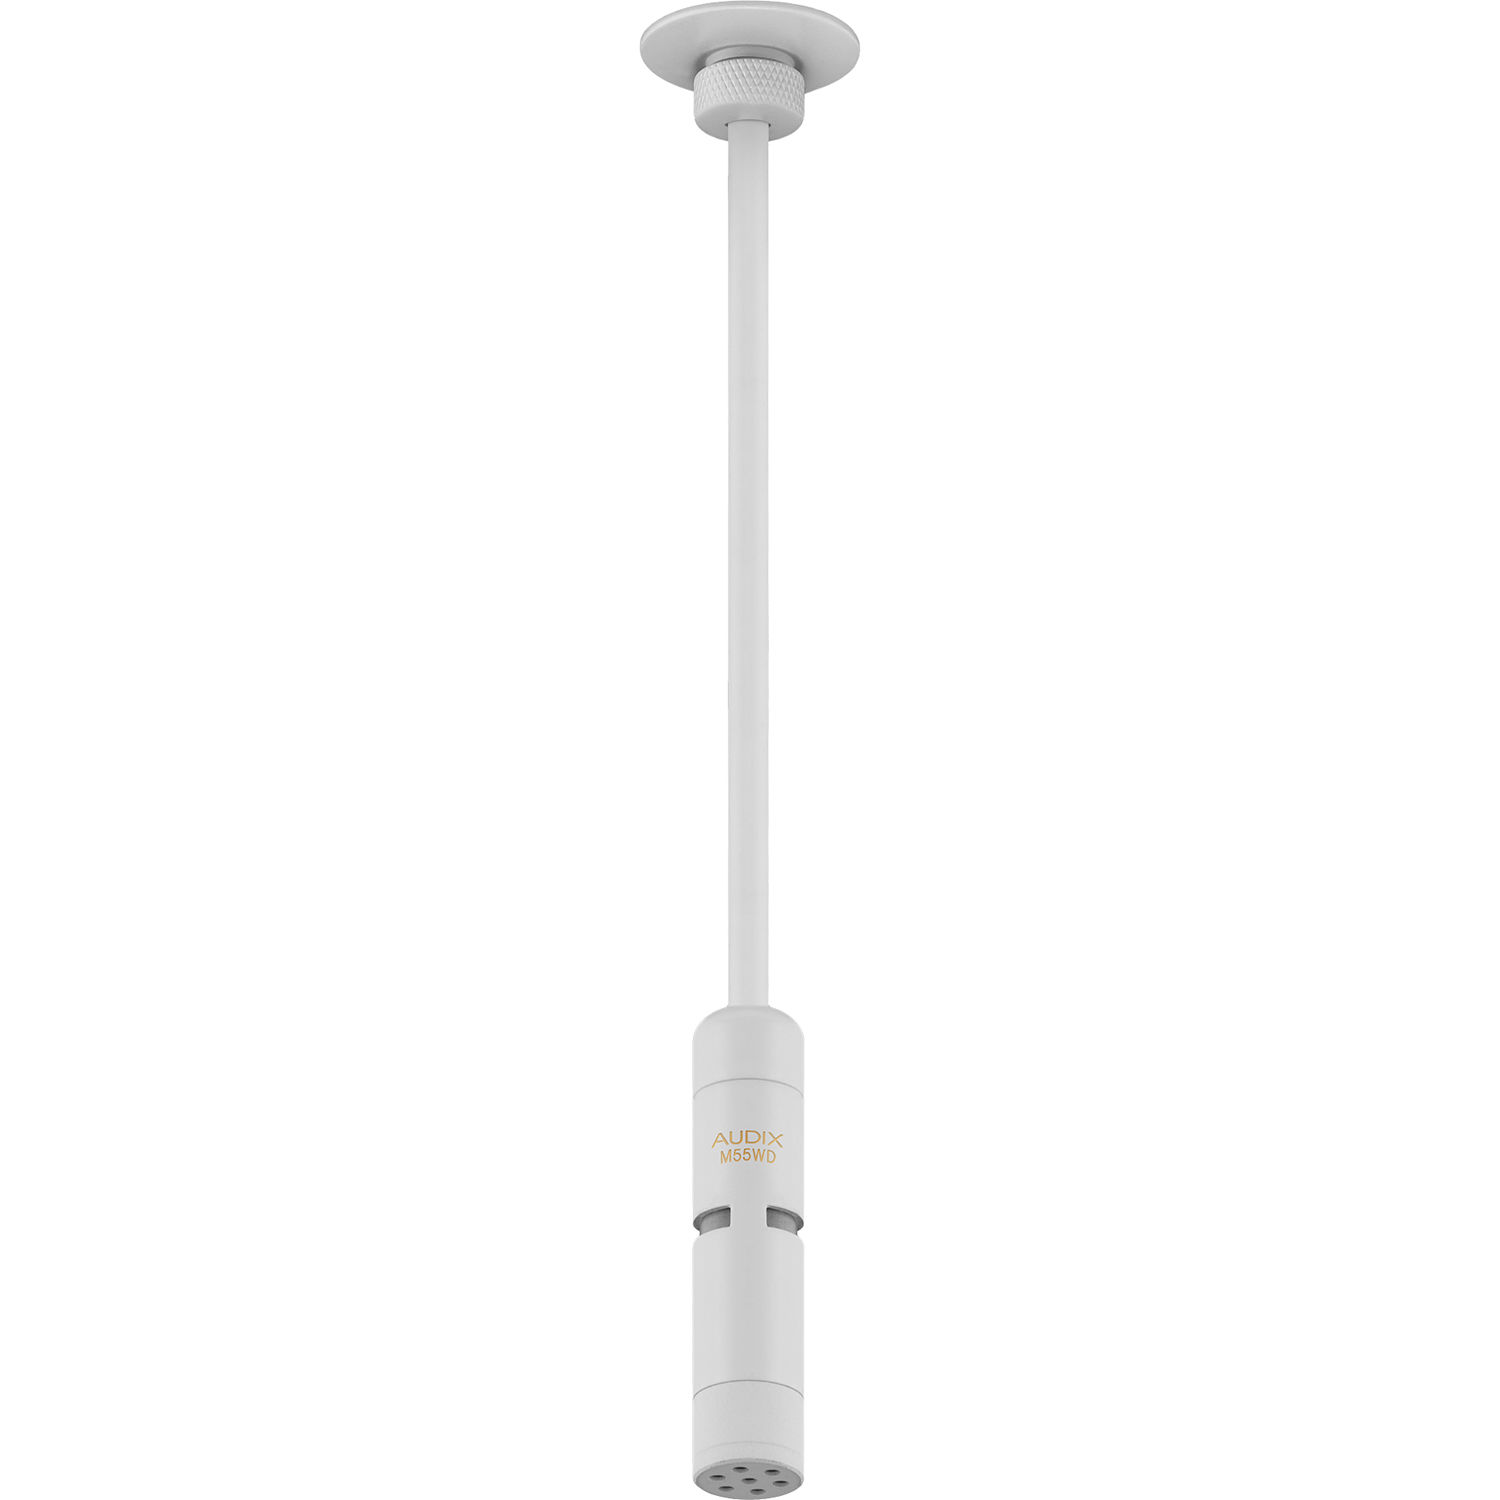 Audix M55wd Hanging Ceiling Microphone M55wd B H Photo Video